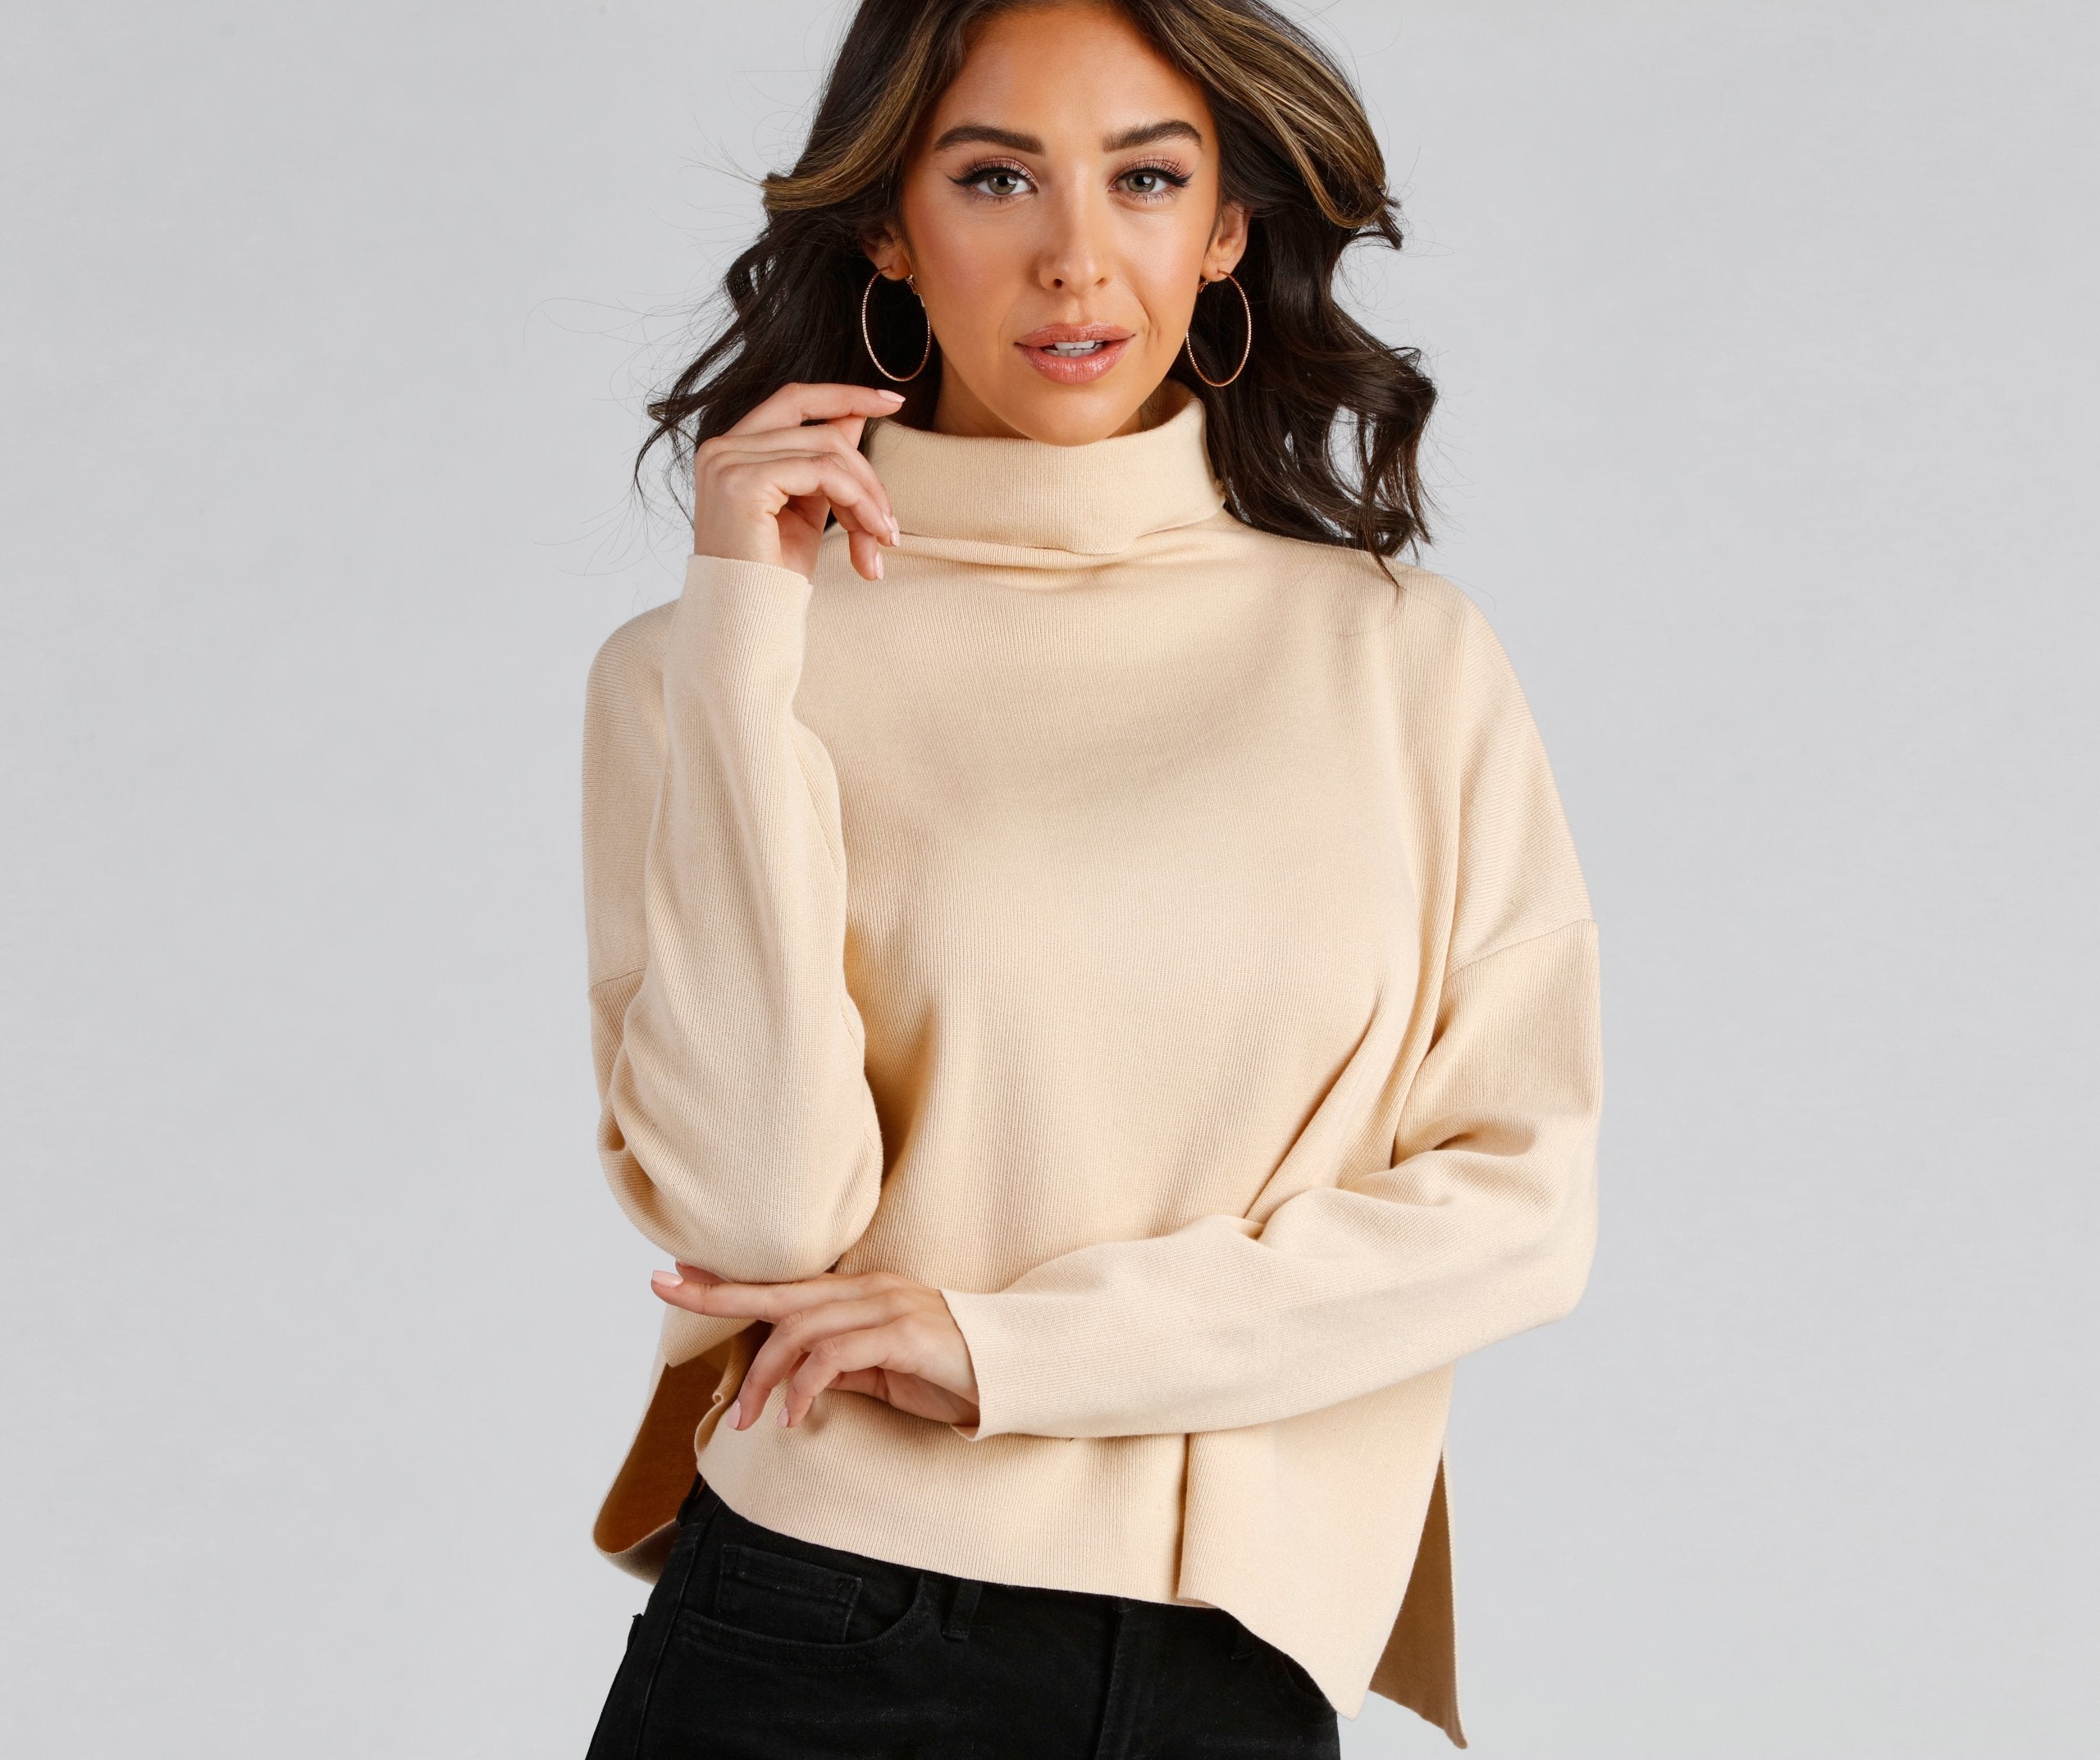 Keeping Knit Cozy Turtleneck Sweater - Lady Occasions